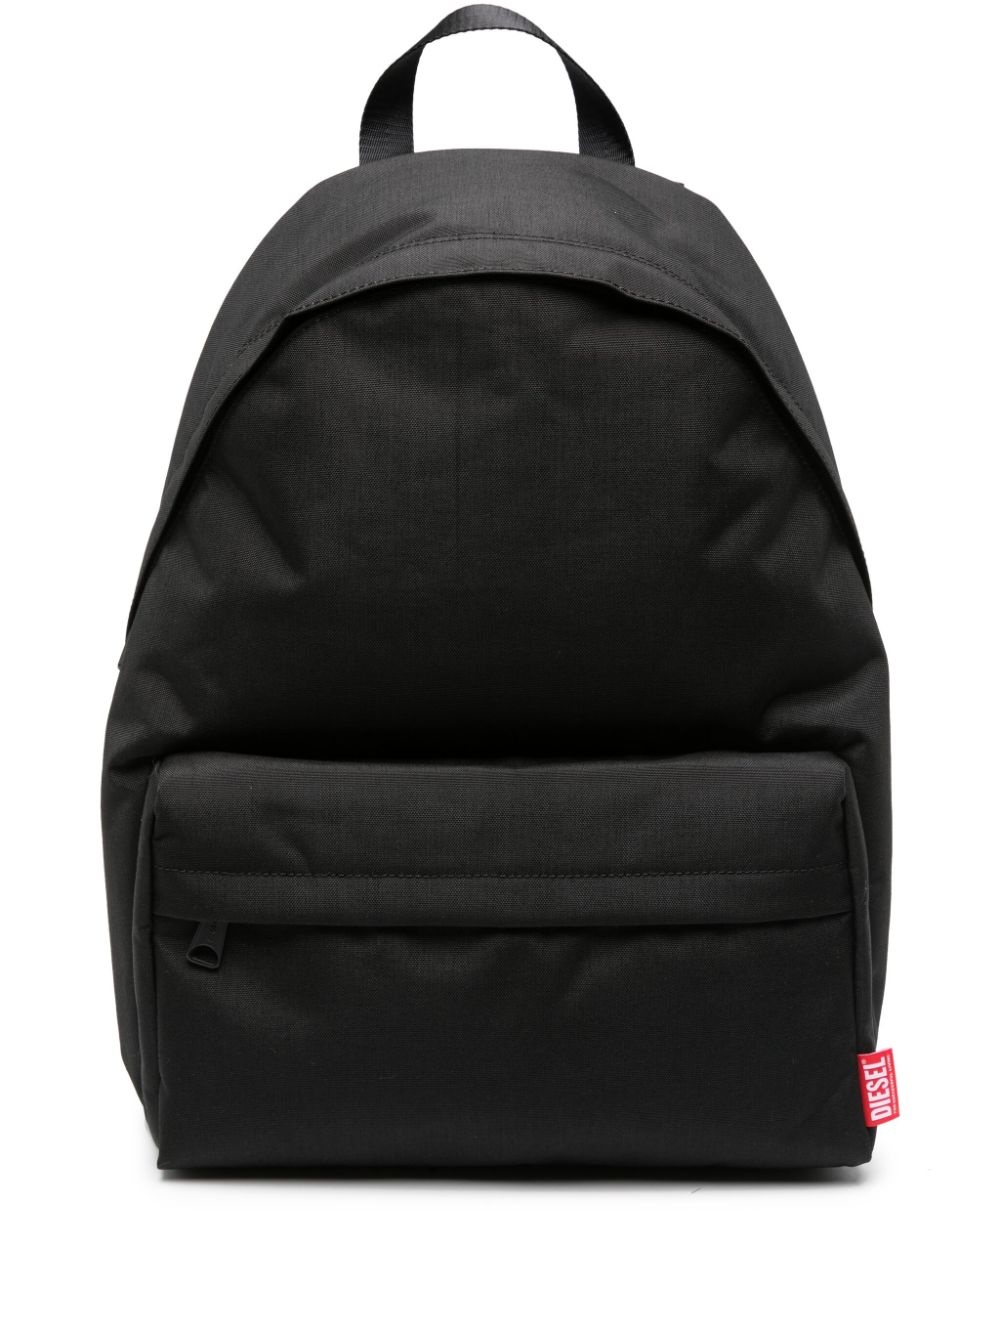 D-BSC backpack - 1